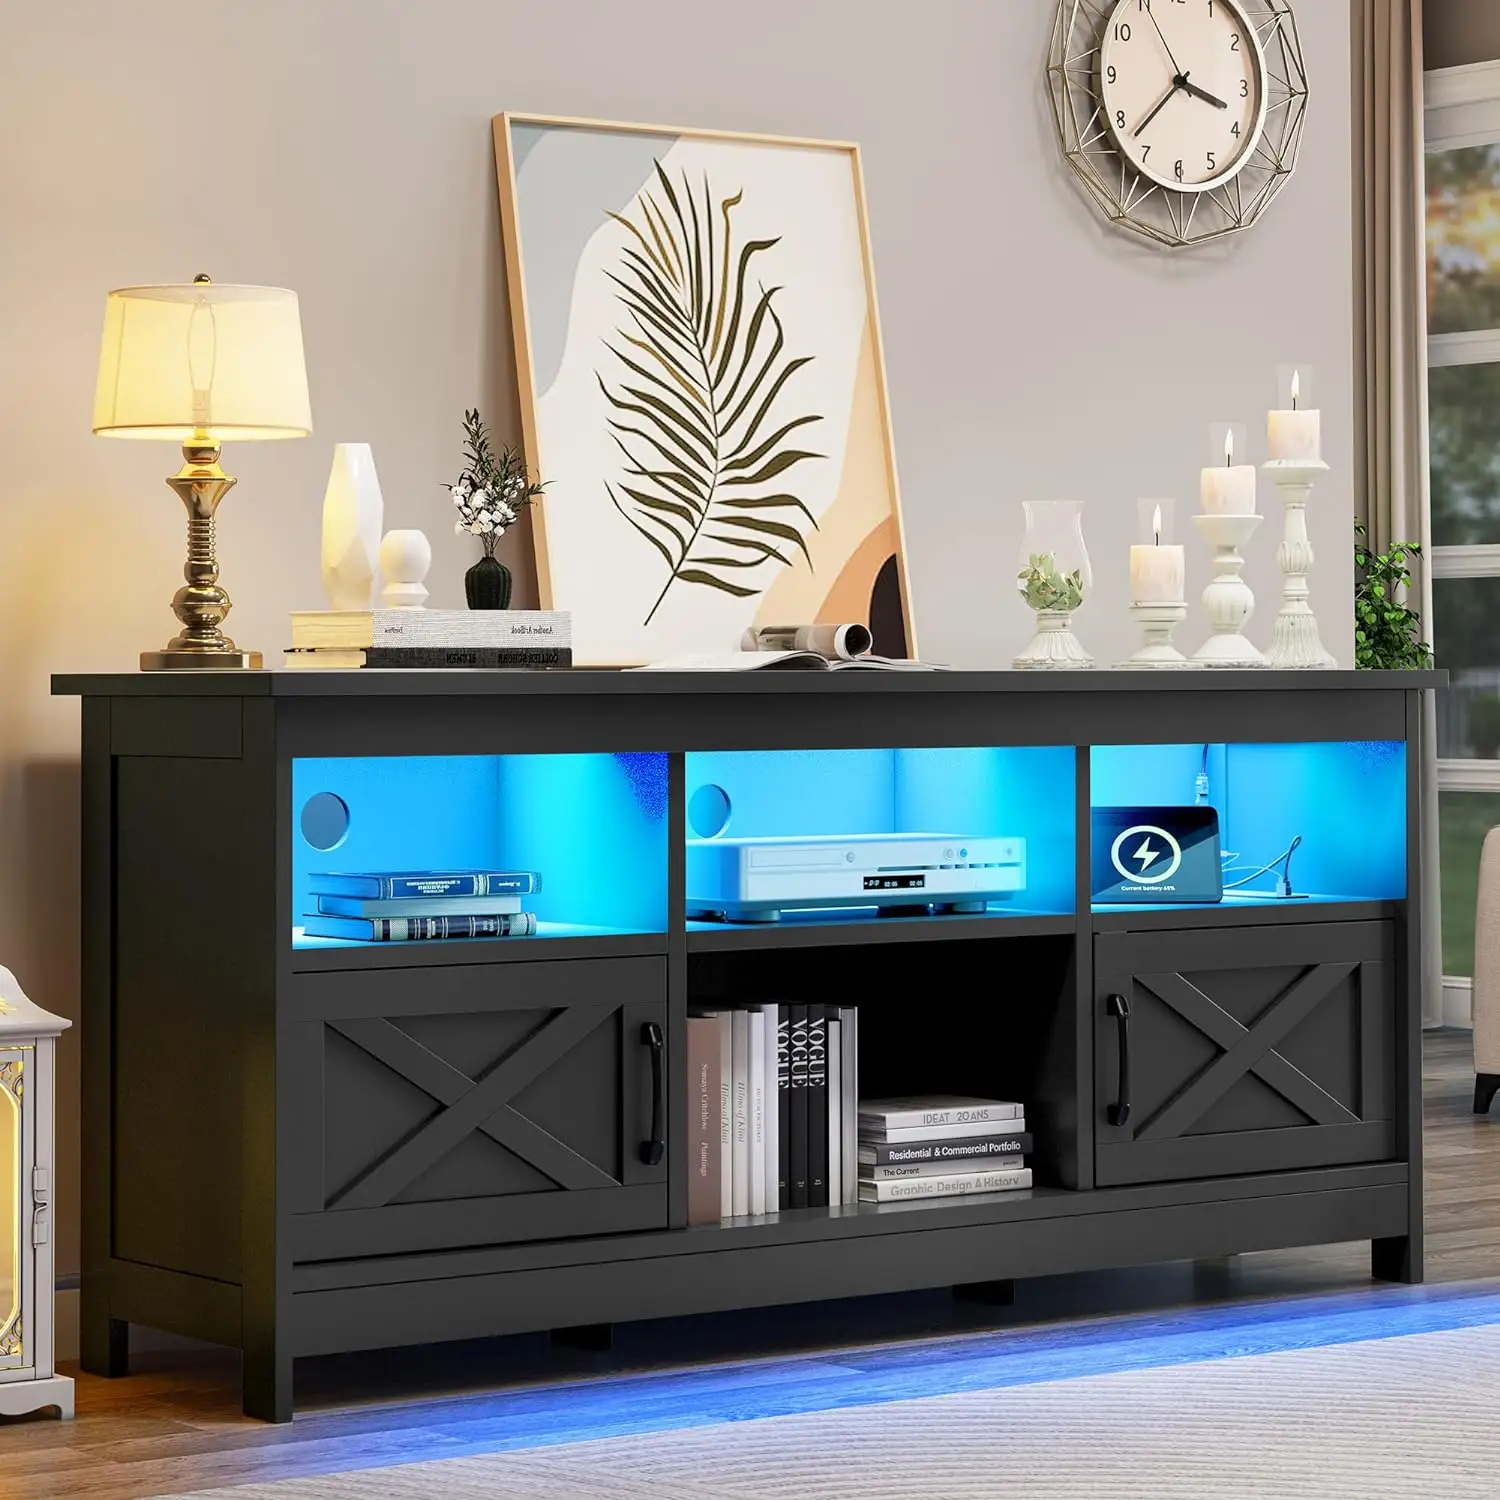 Farmhouse TV Stand LED Light Entertainment Center With Storage Cabinets And Power Outlet